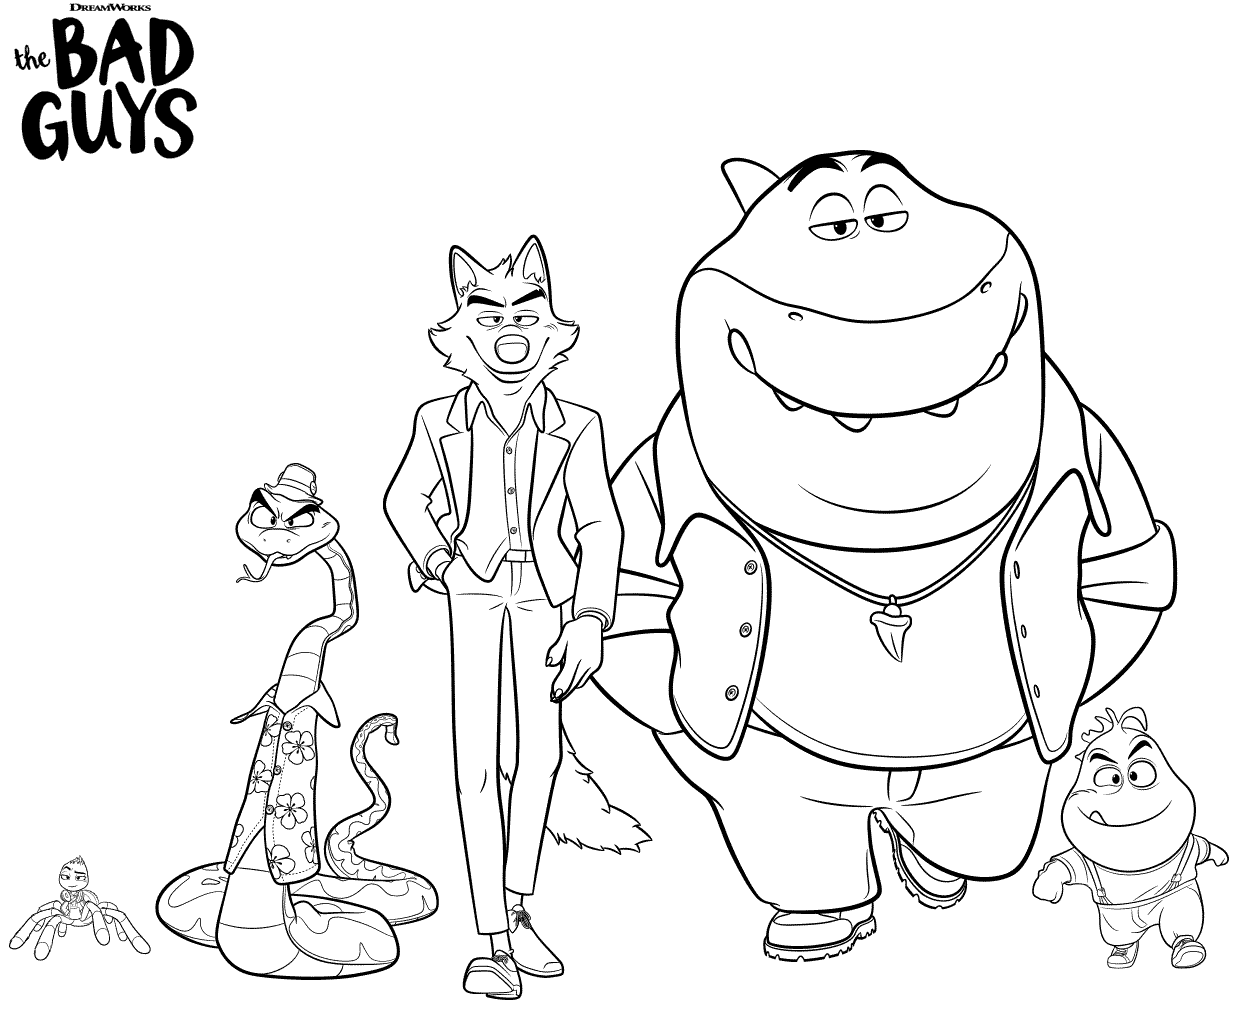 The Bad Guy Coloring Pages Pdf to Print - Bad Guy Coloring Pages